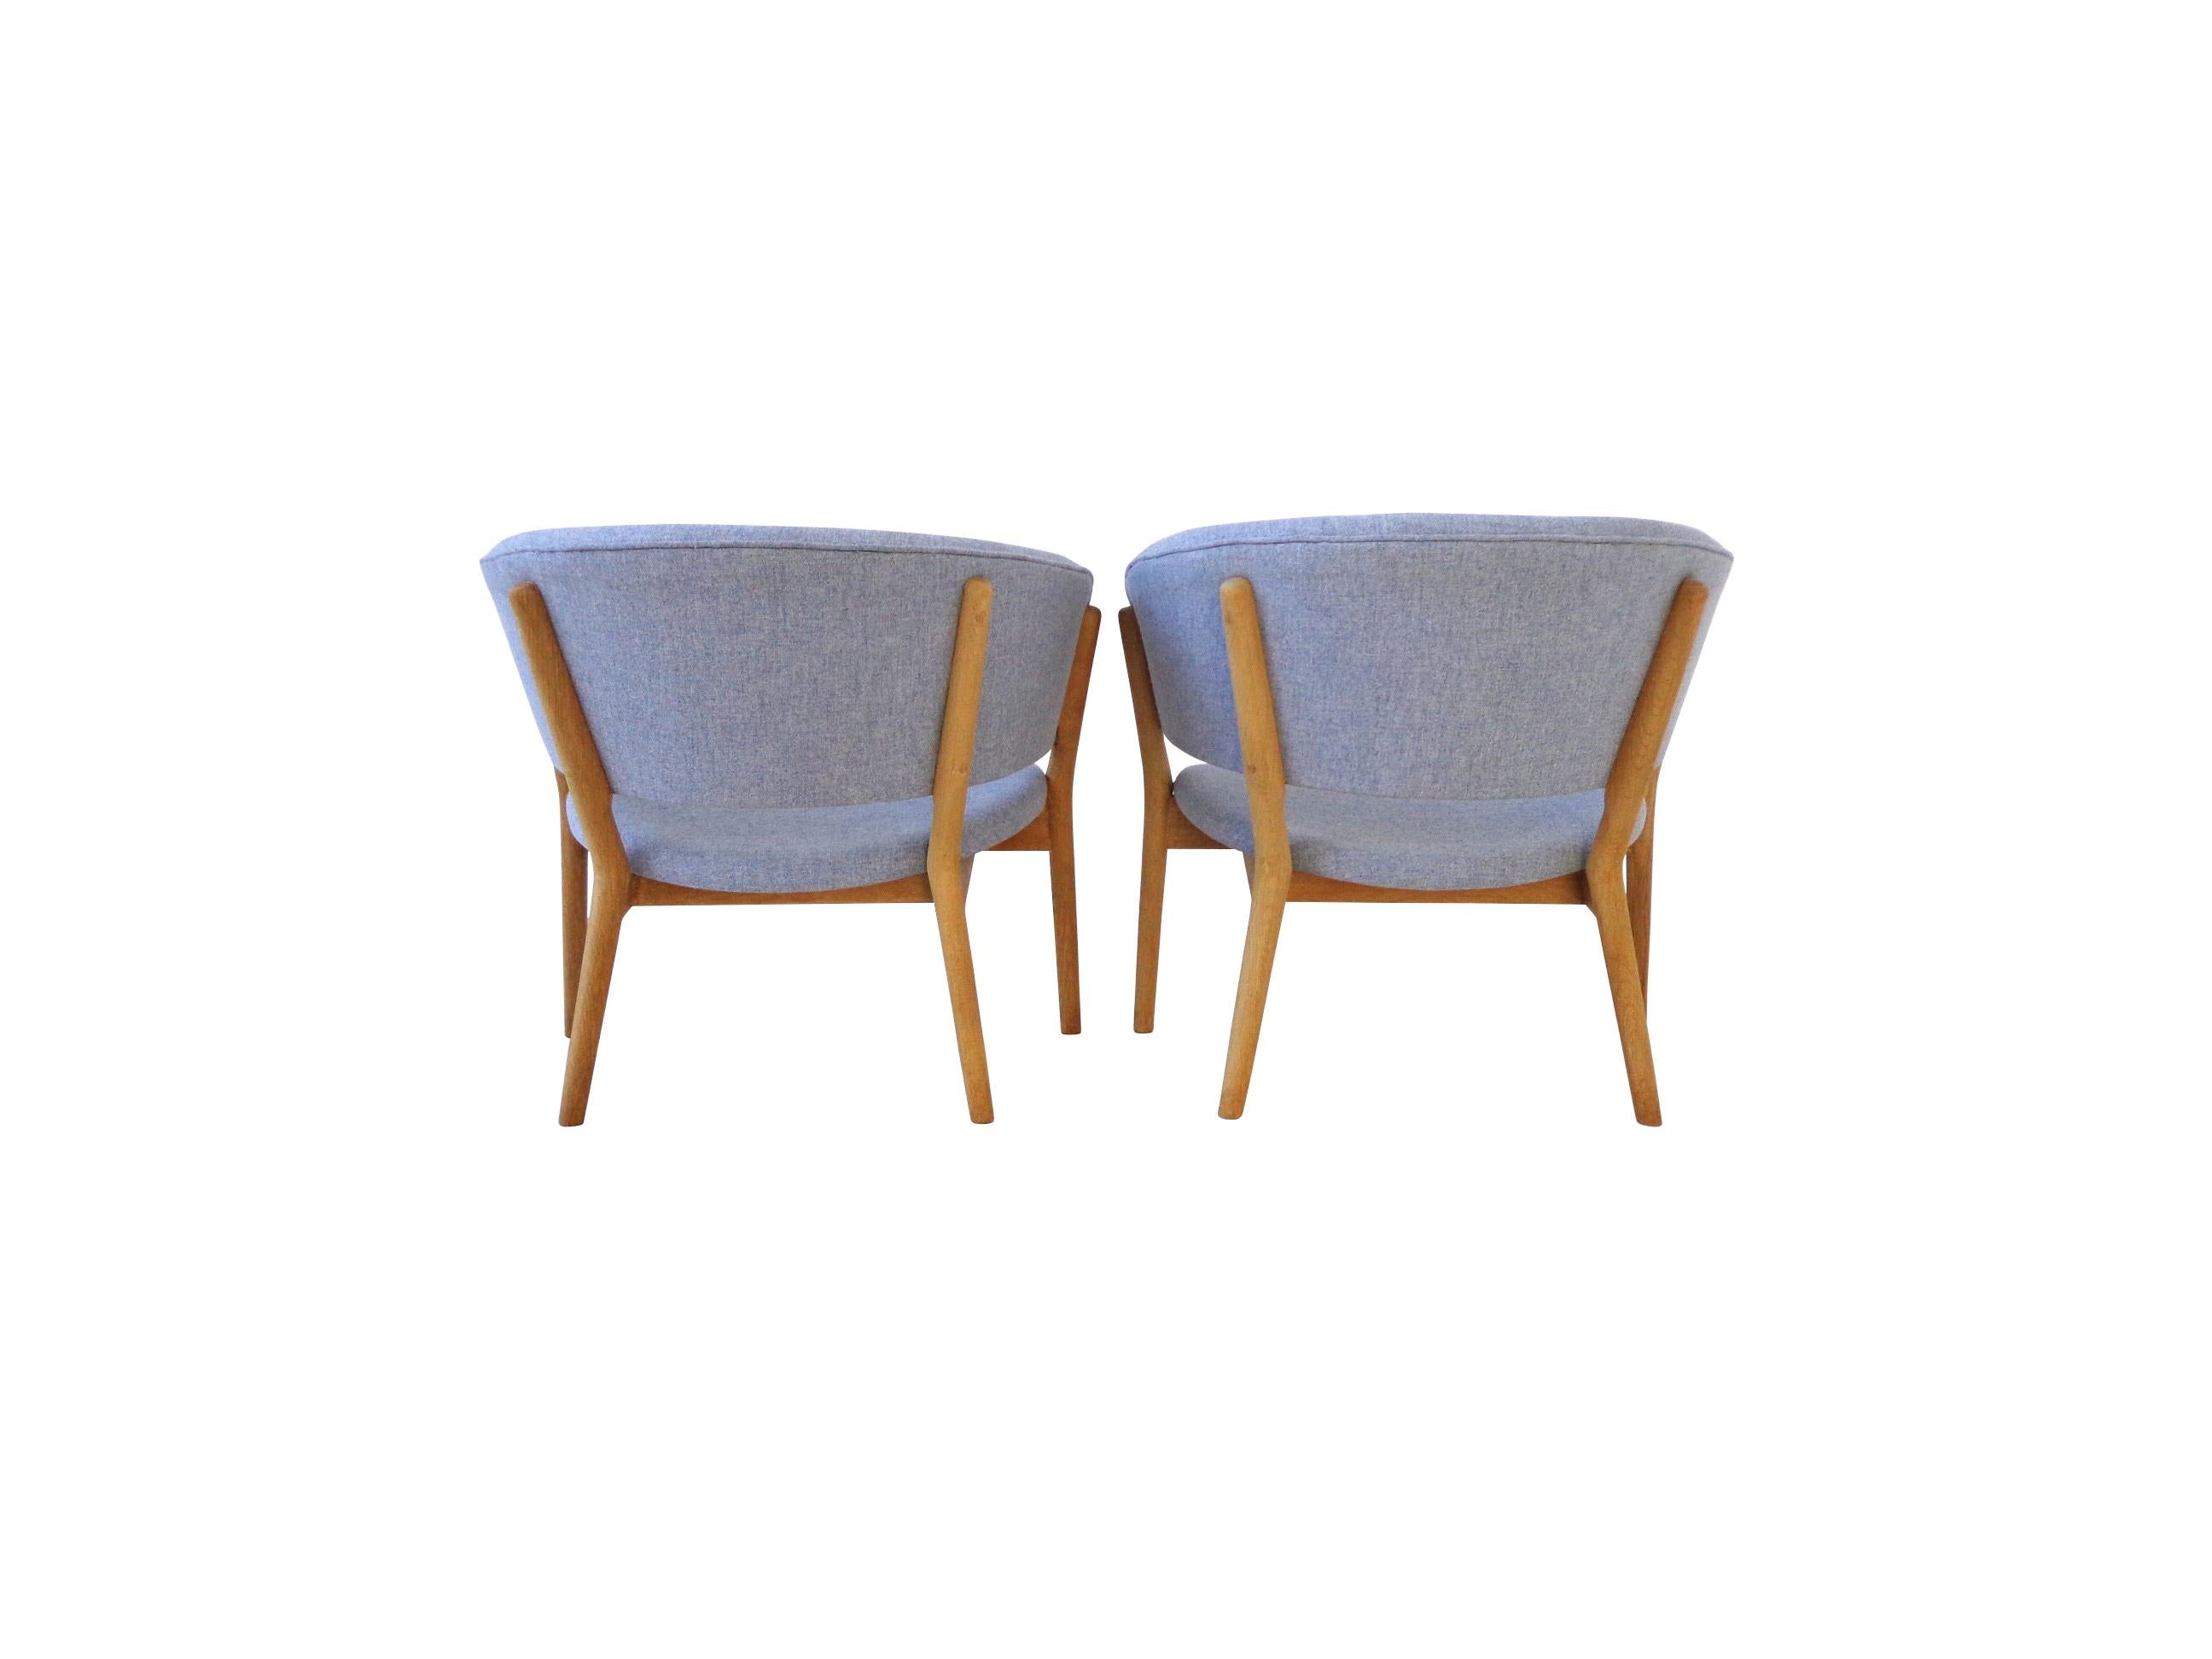 Mid-20th Century Nanna Ditzel Pair of Lounge Chairs in Wool by Soren Willadsen, Denmark, 1950s For Sale